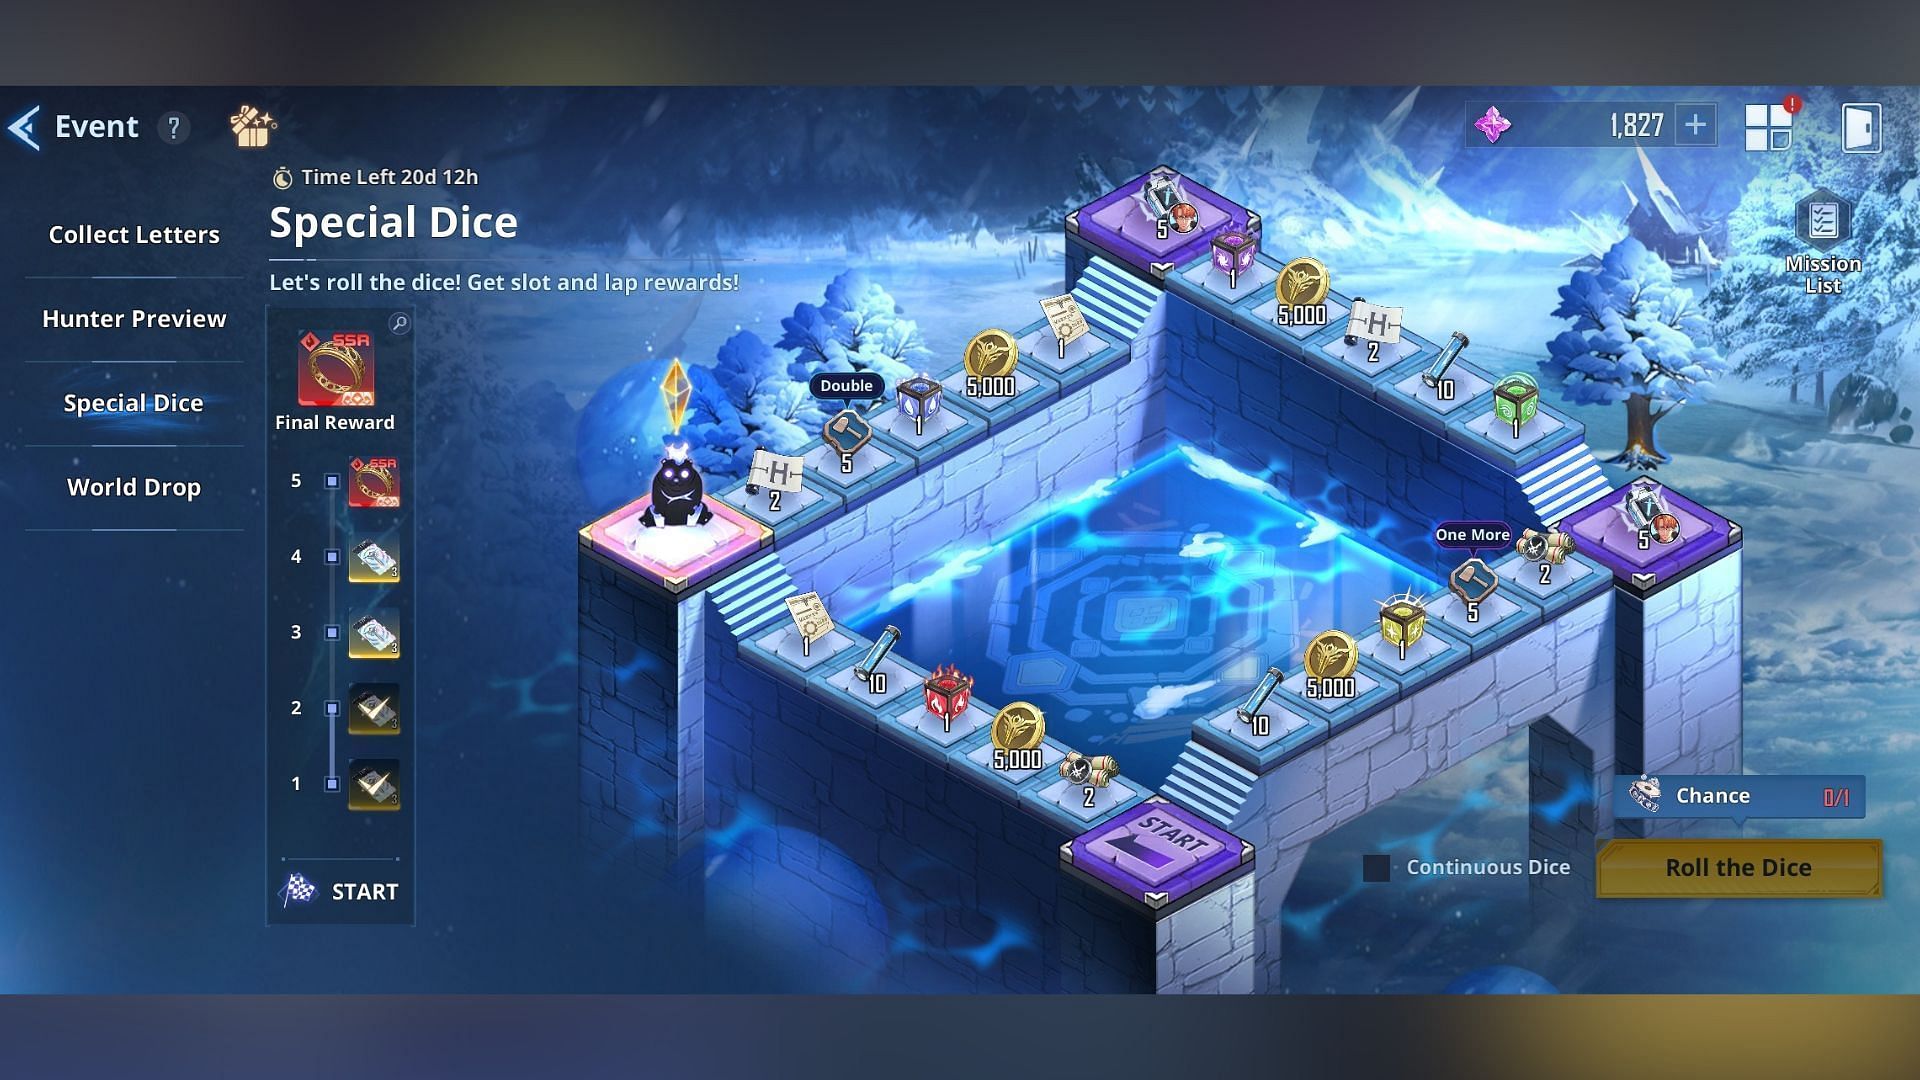 You can farm Gold in Solo Leveling: Arise by playing events. (Image via Netmarble)